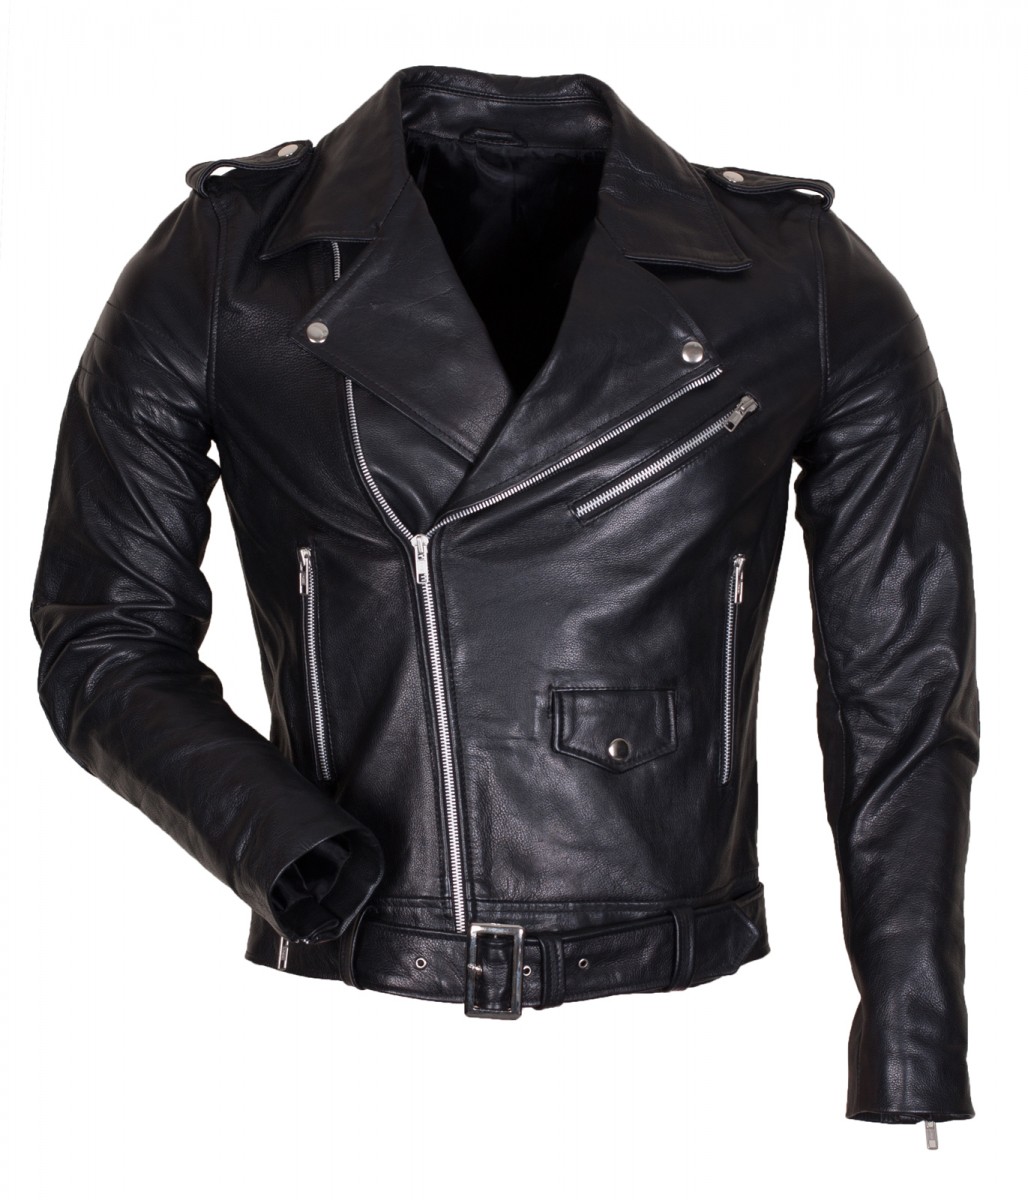 Leather Motorcycle Jacket Black Brando - Real Leather Free Shipping